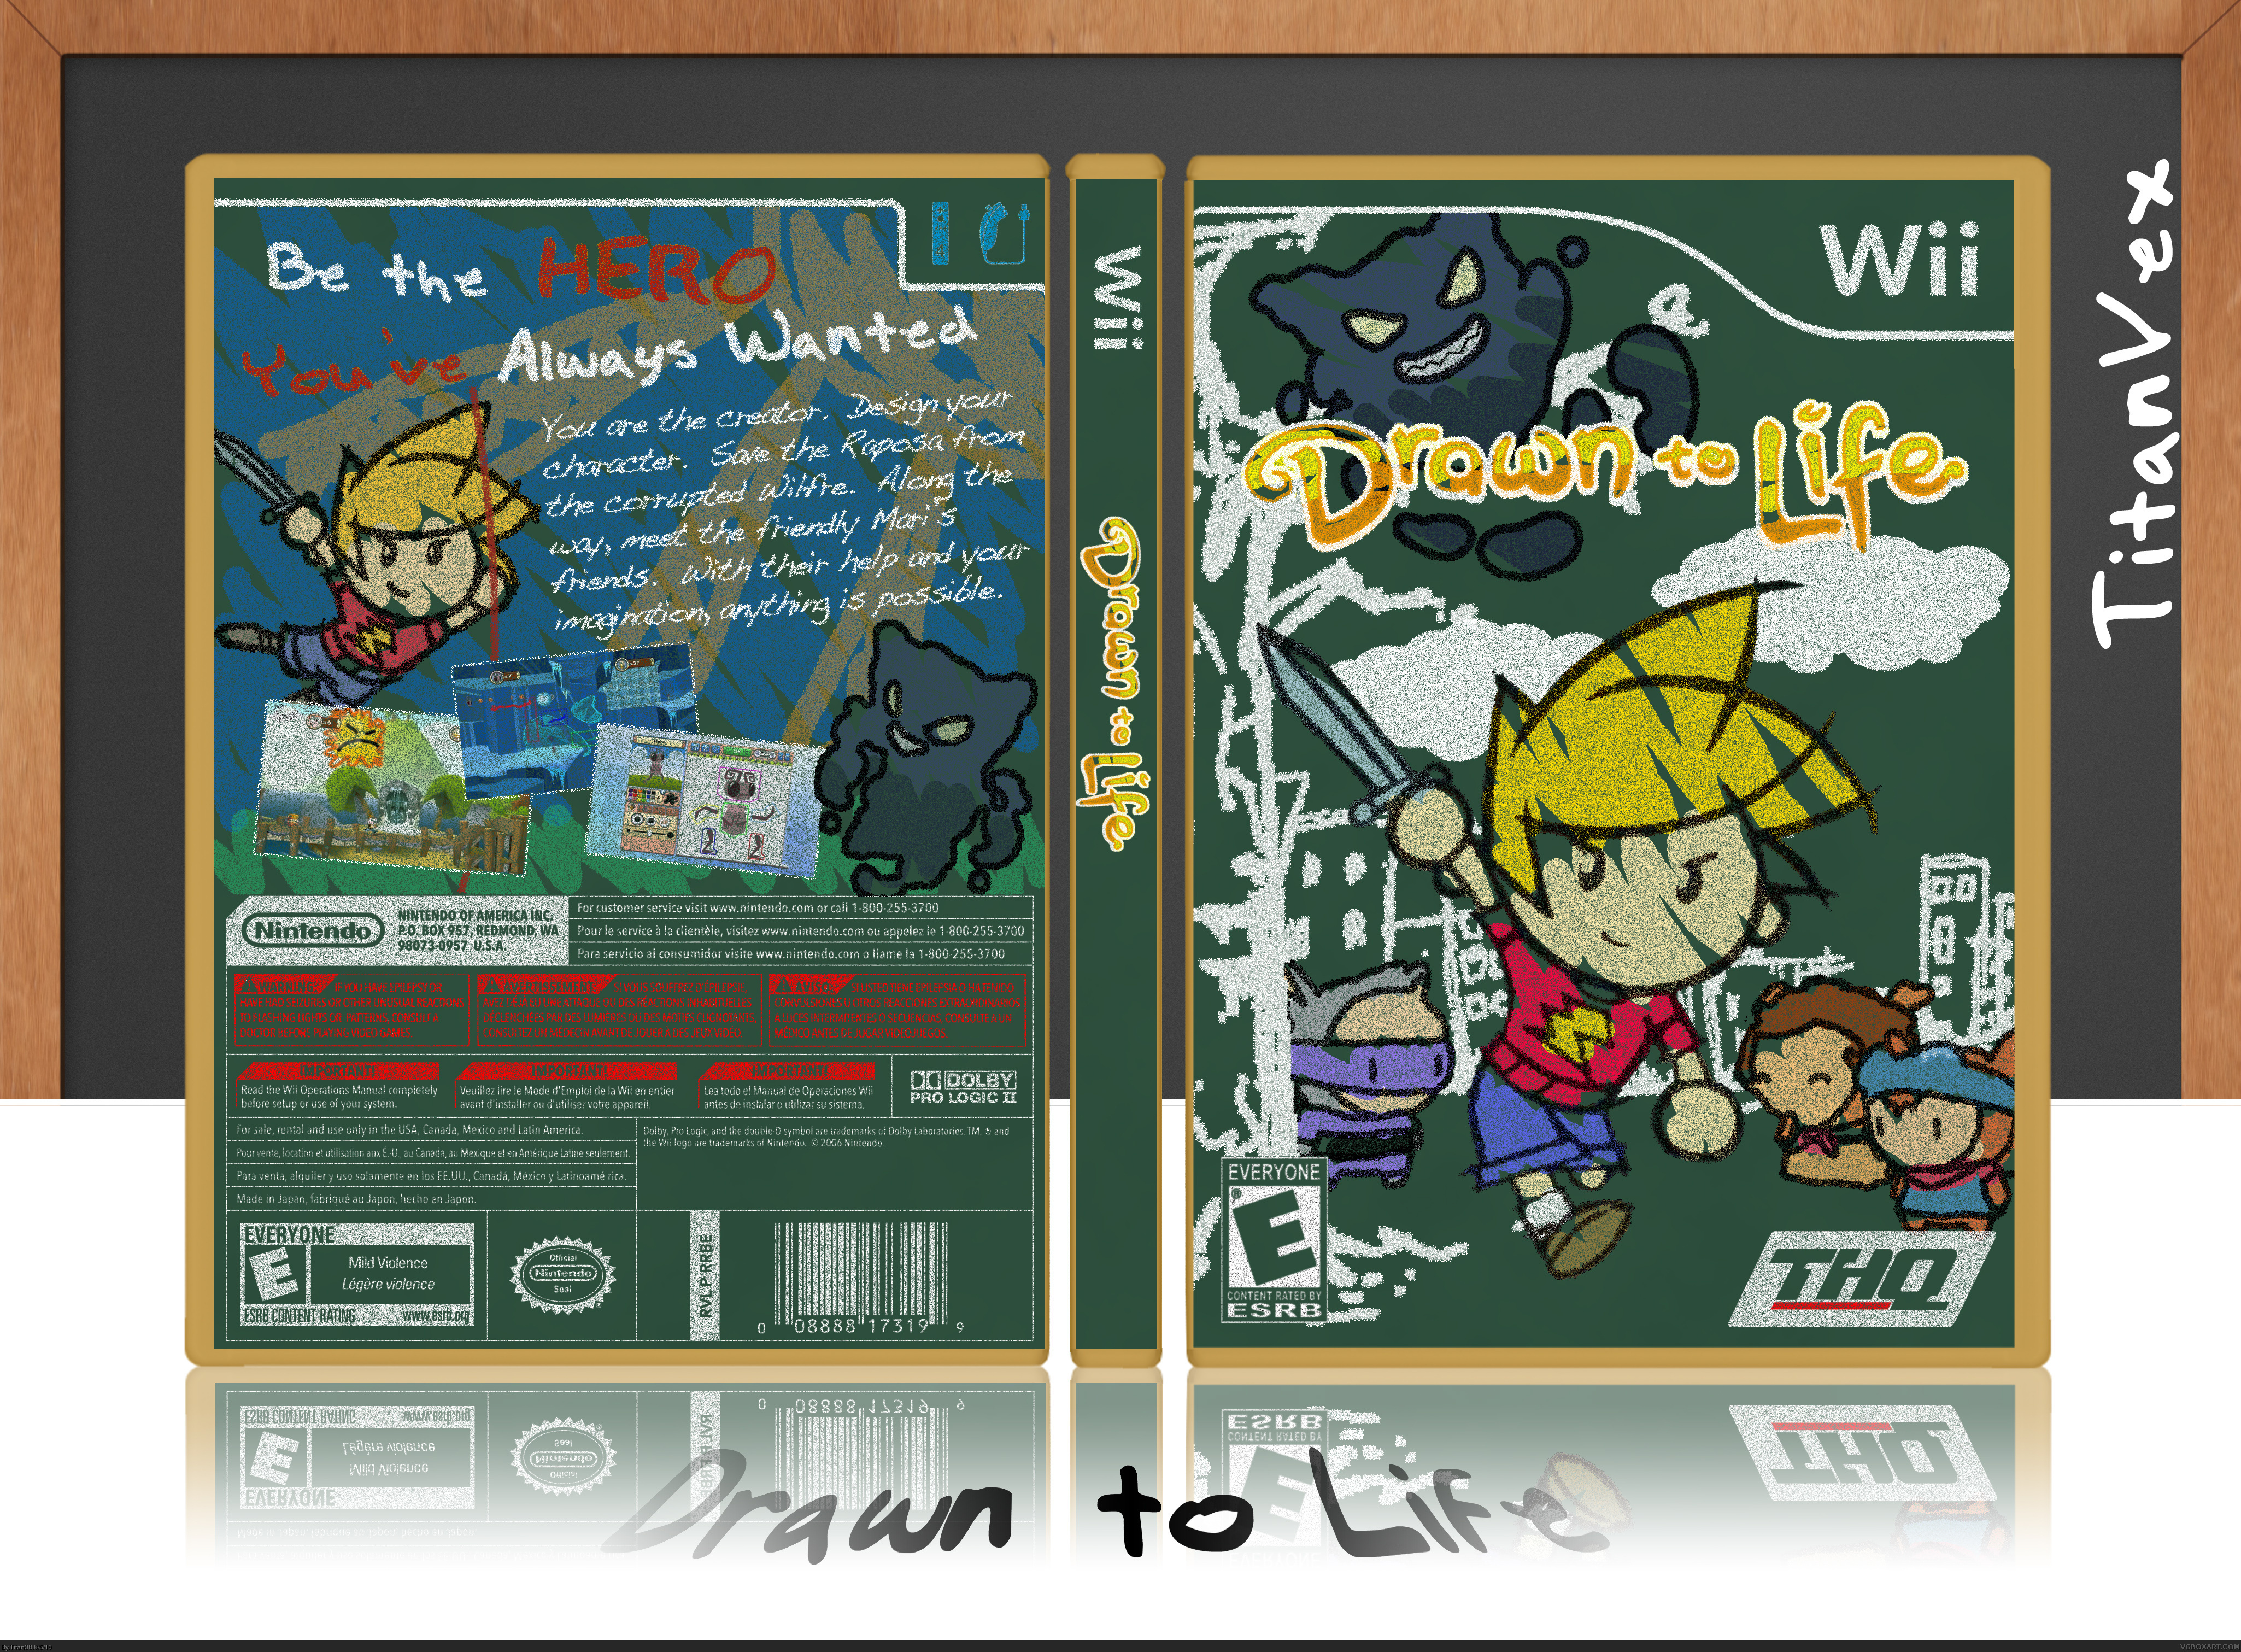 Drawn to Life: Wii box cover